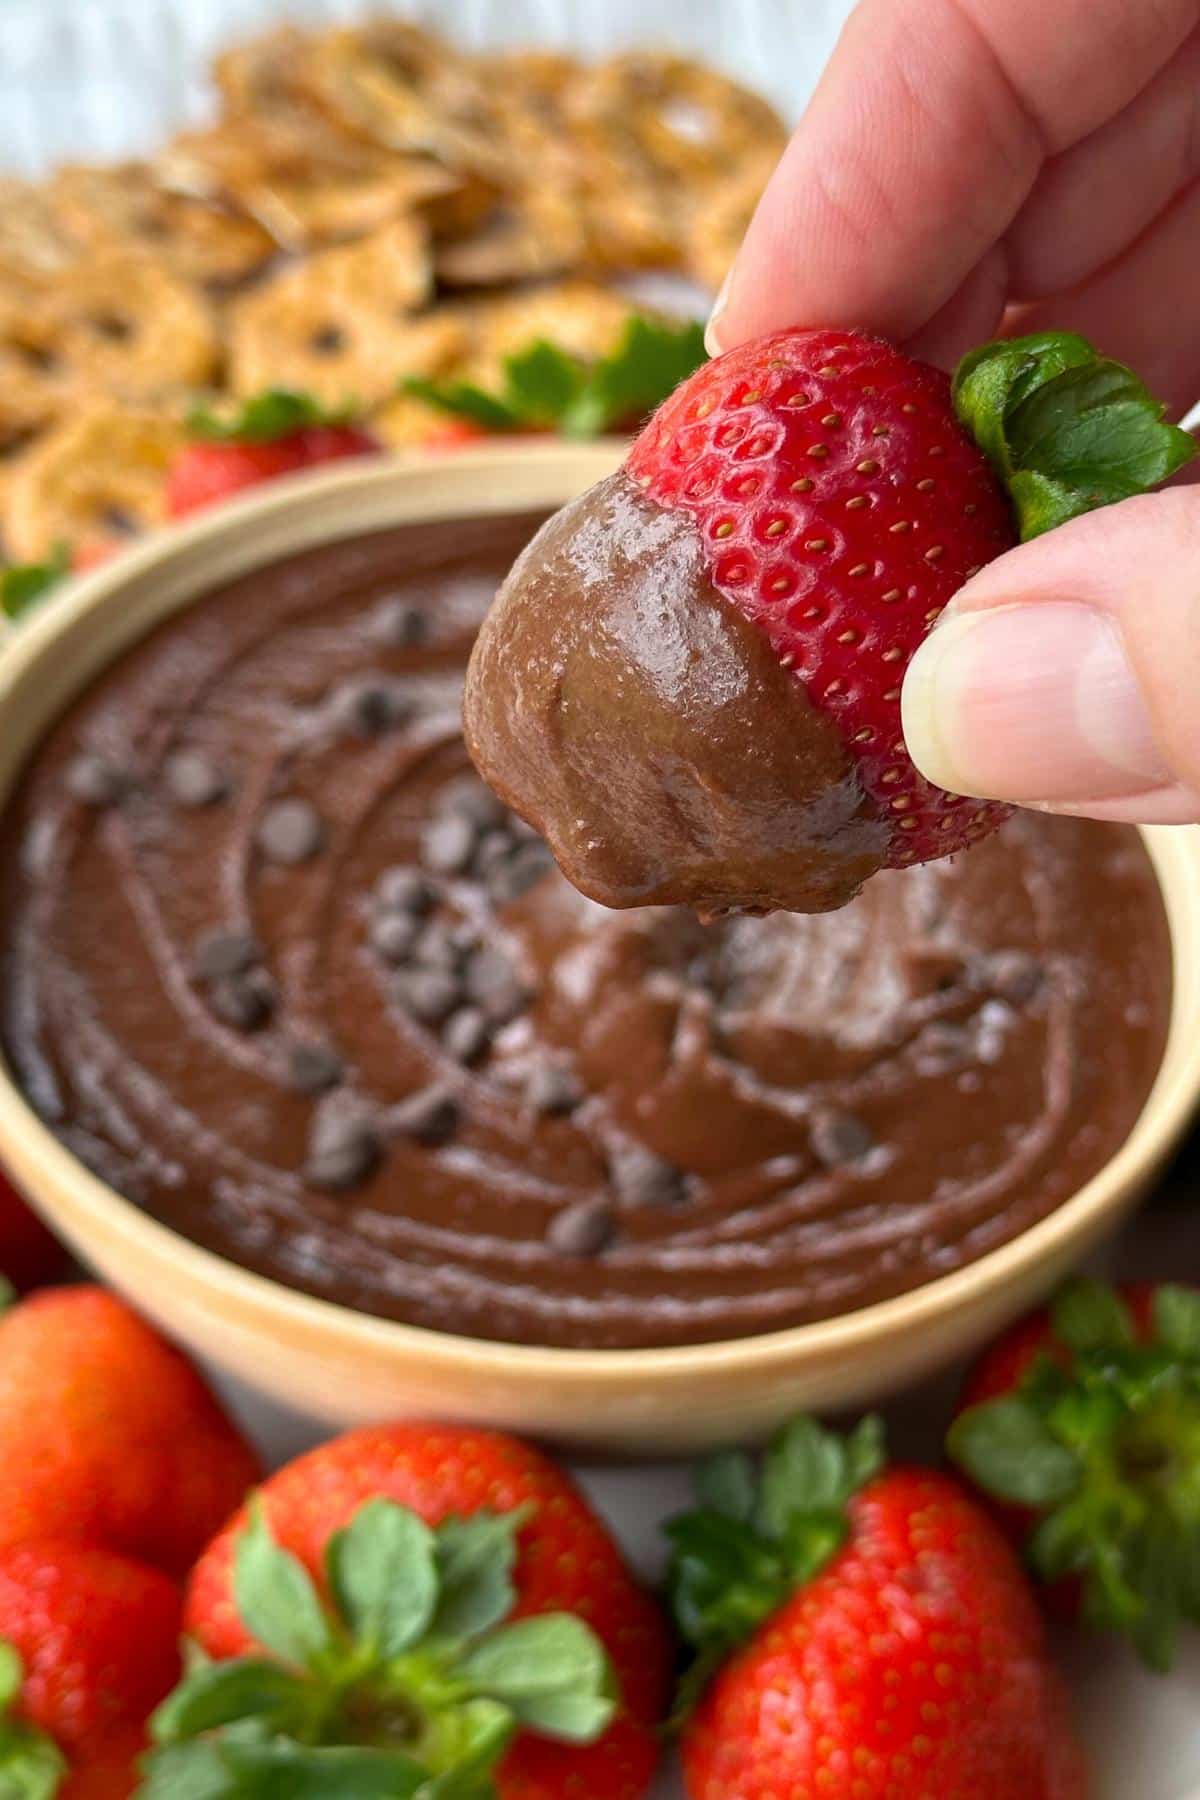 Strawberry dipped in brownie batter dessert hummus. The bowl of hummus, strawberries, and pretzel chips are in the background.